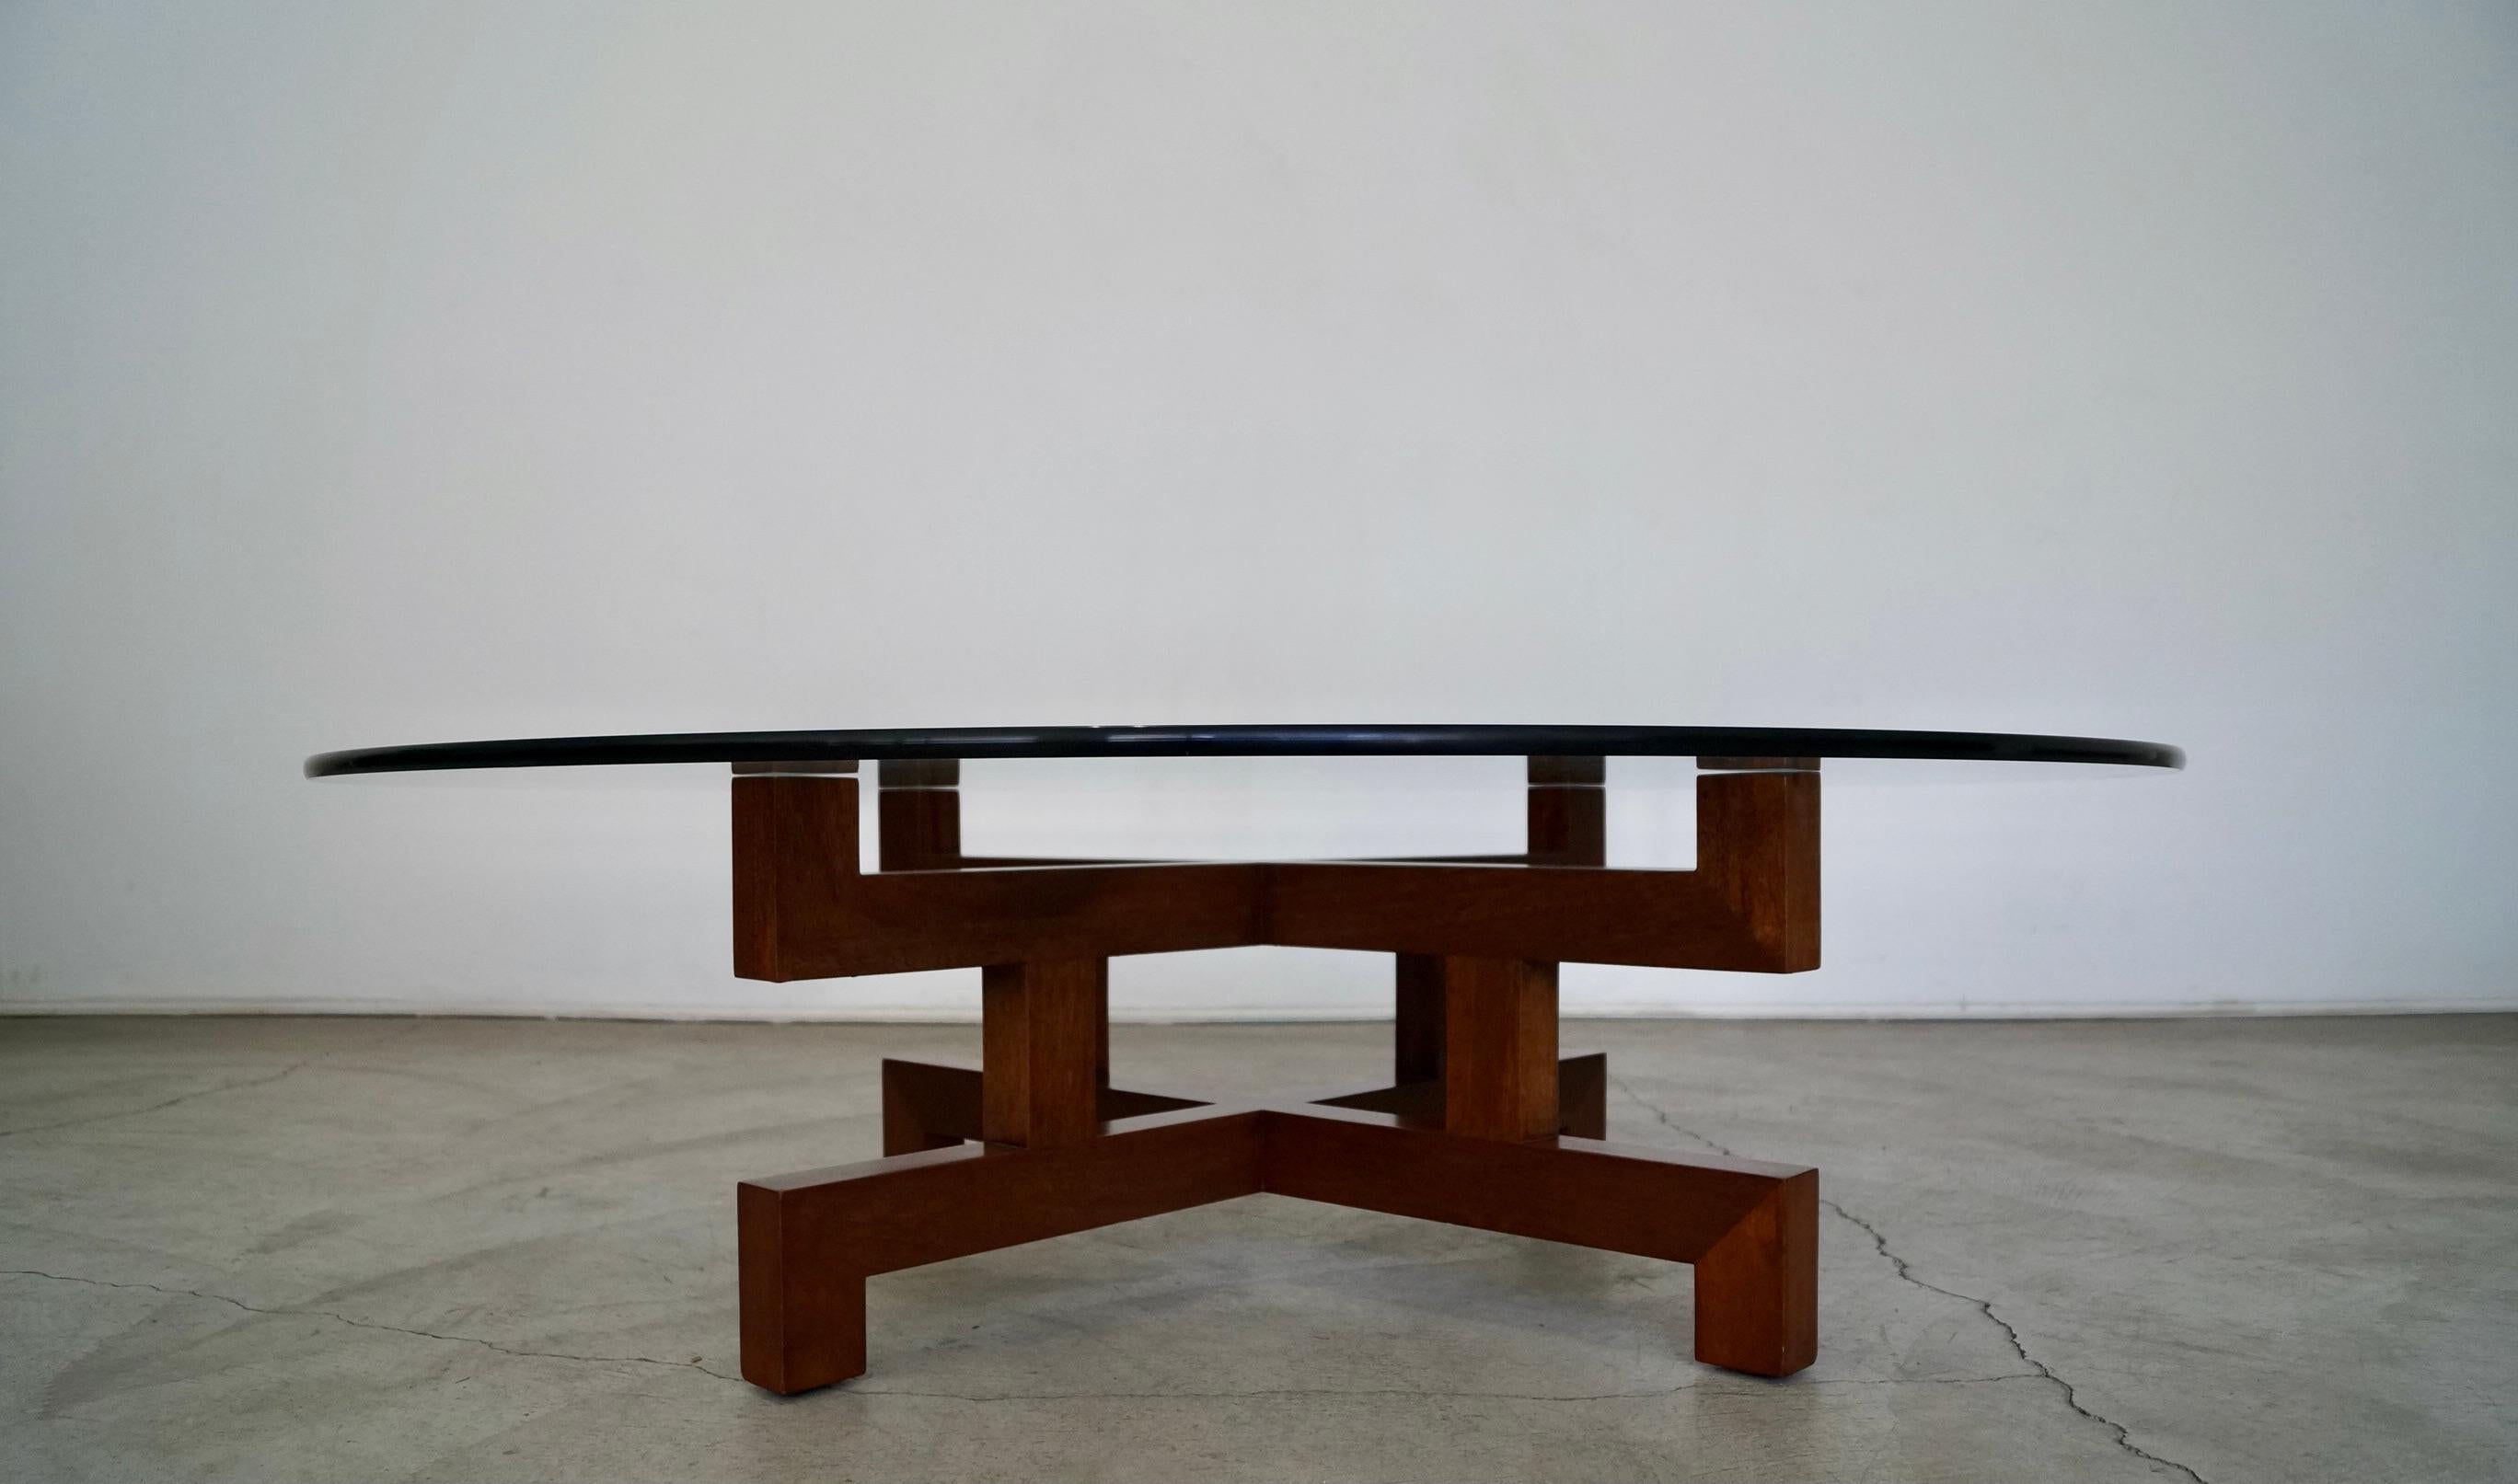 North American 1960's Mid-Century Modern Sculptural Coffee Table For Sale